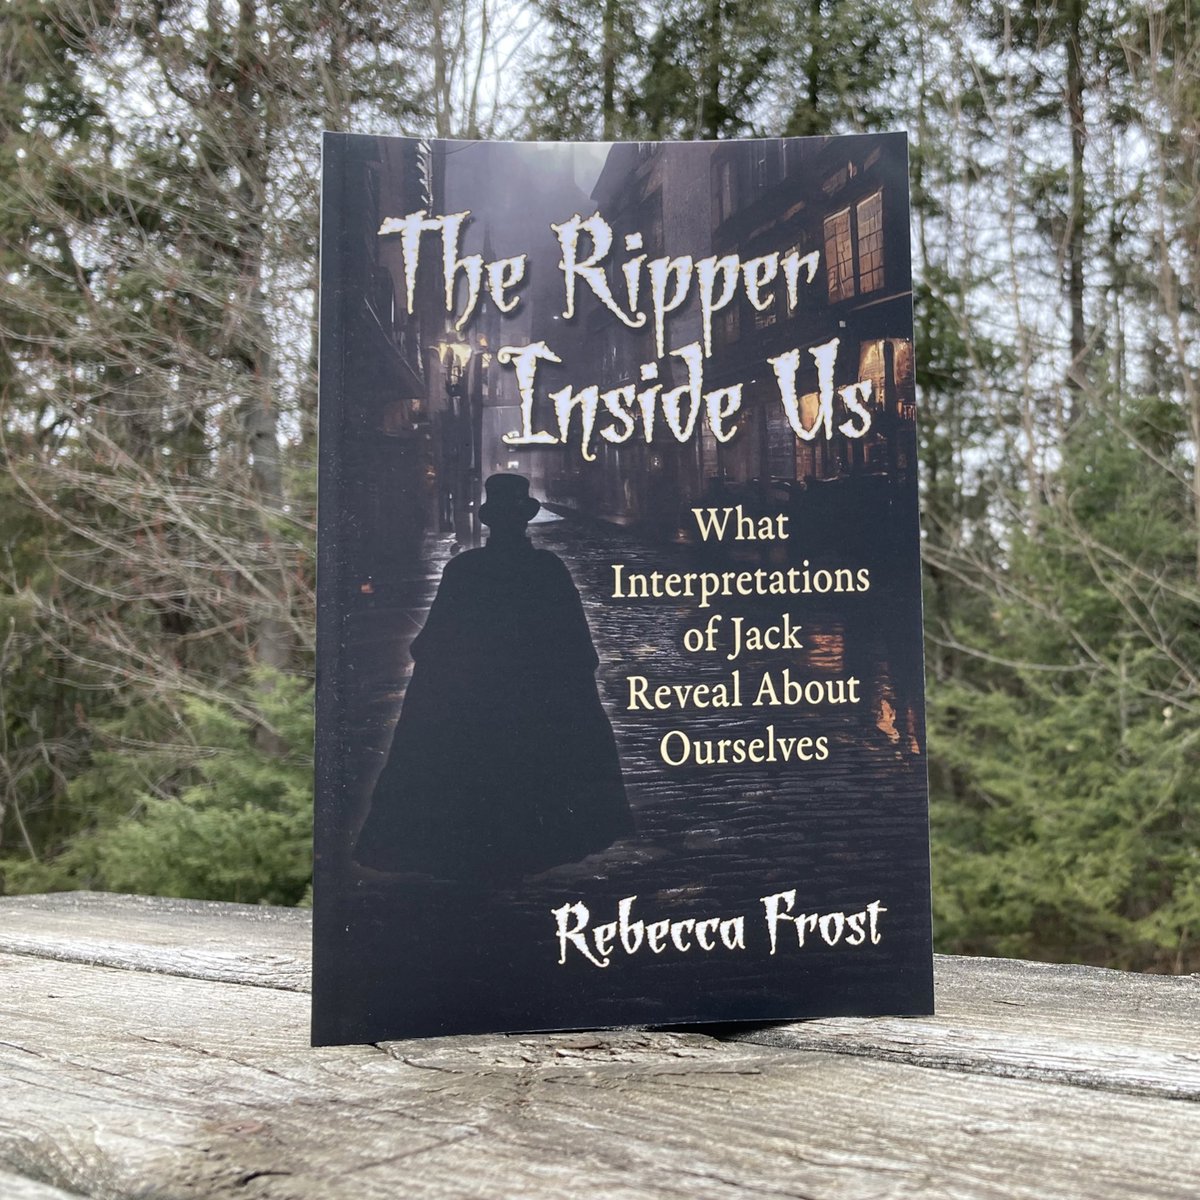 My newest book from @McFarlandCoPub just arrived - and it’s blurbed by @HallieRubenhold! Why DO we keep talking about the Ripper? (Spoiler: it says far more about us than it does about him.)